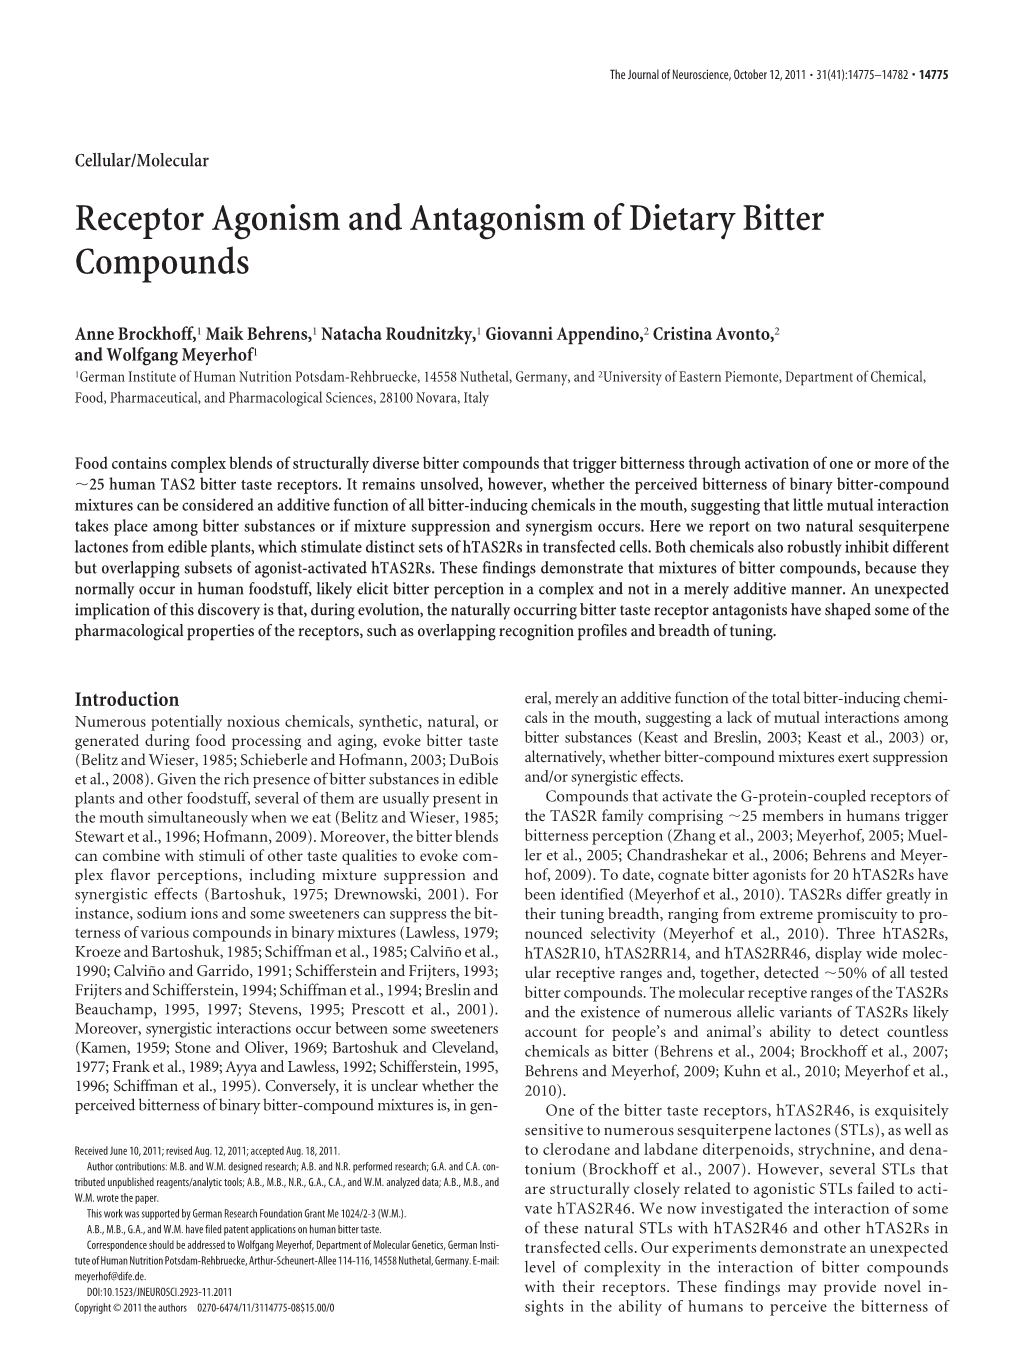 Receptor Agonism and Antagonism of Dietary Bitter Compounds